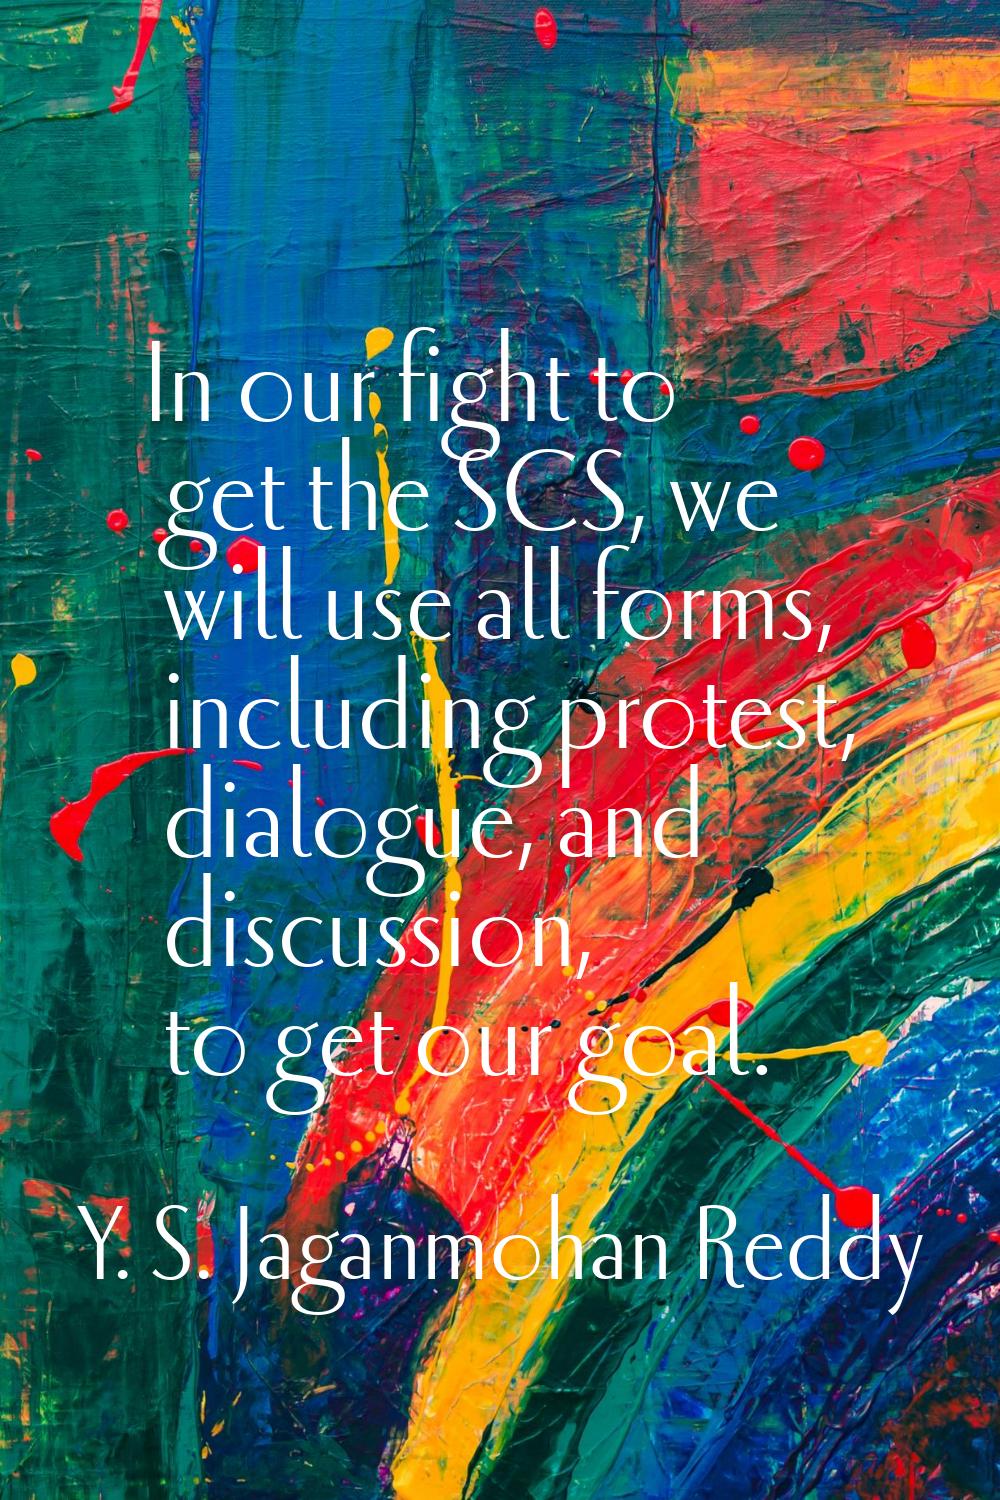 In our fight to get the SCS, we will use all forms, including protest, dialogue, and discussion, to